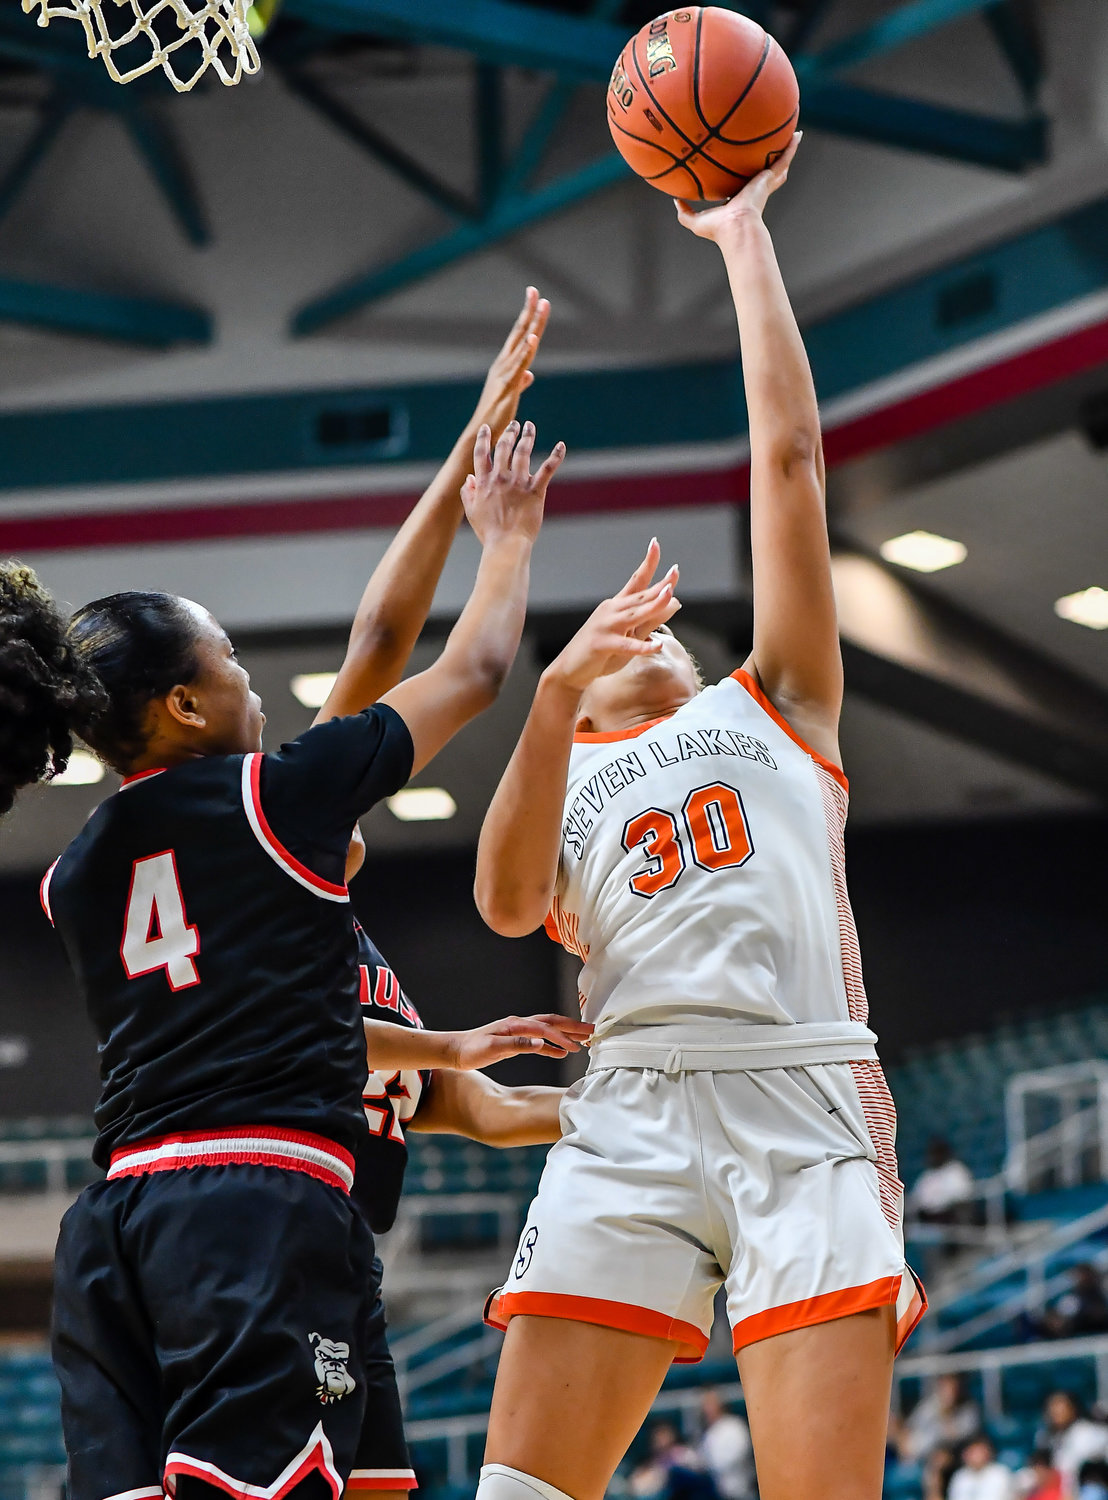 Katy Tx. Feb 22, 2022:  Seven Lakes Justice Carlton #30 scores under the basket during the Regional Quarterfinal playoff game, Seven Lakes vs Fort Bend Austin at the Merrell Center. (Photo by Mark Goodman / Katy Times)